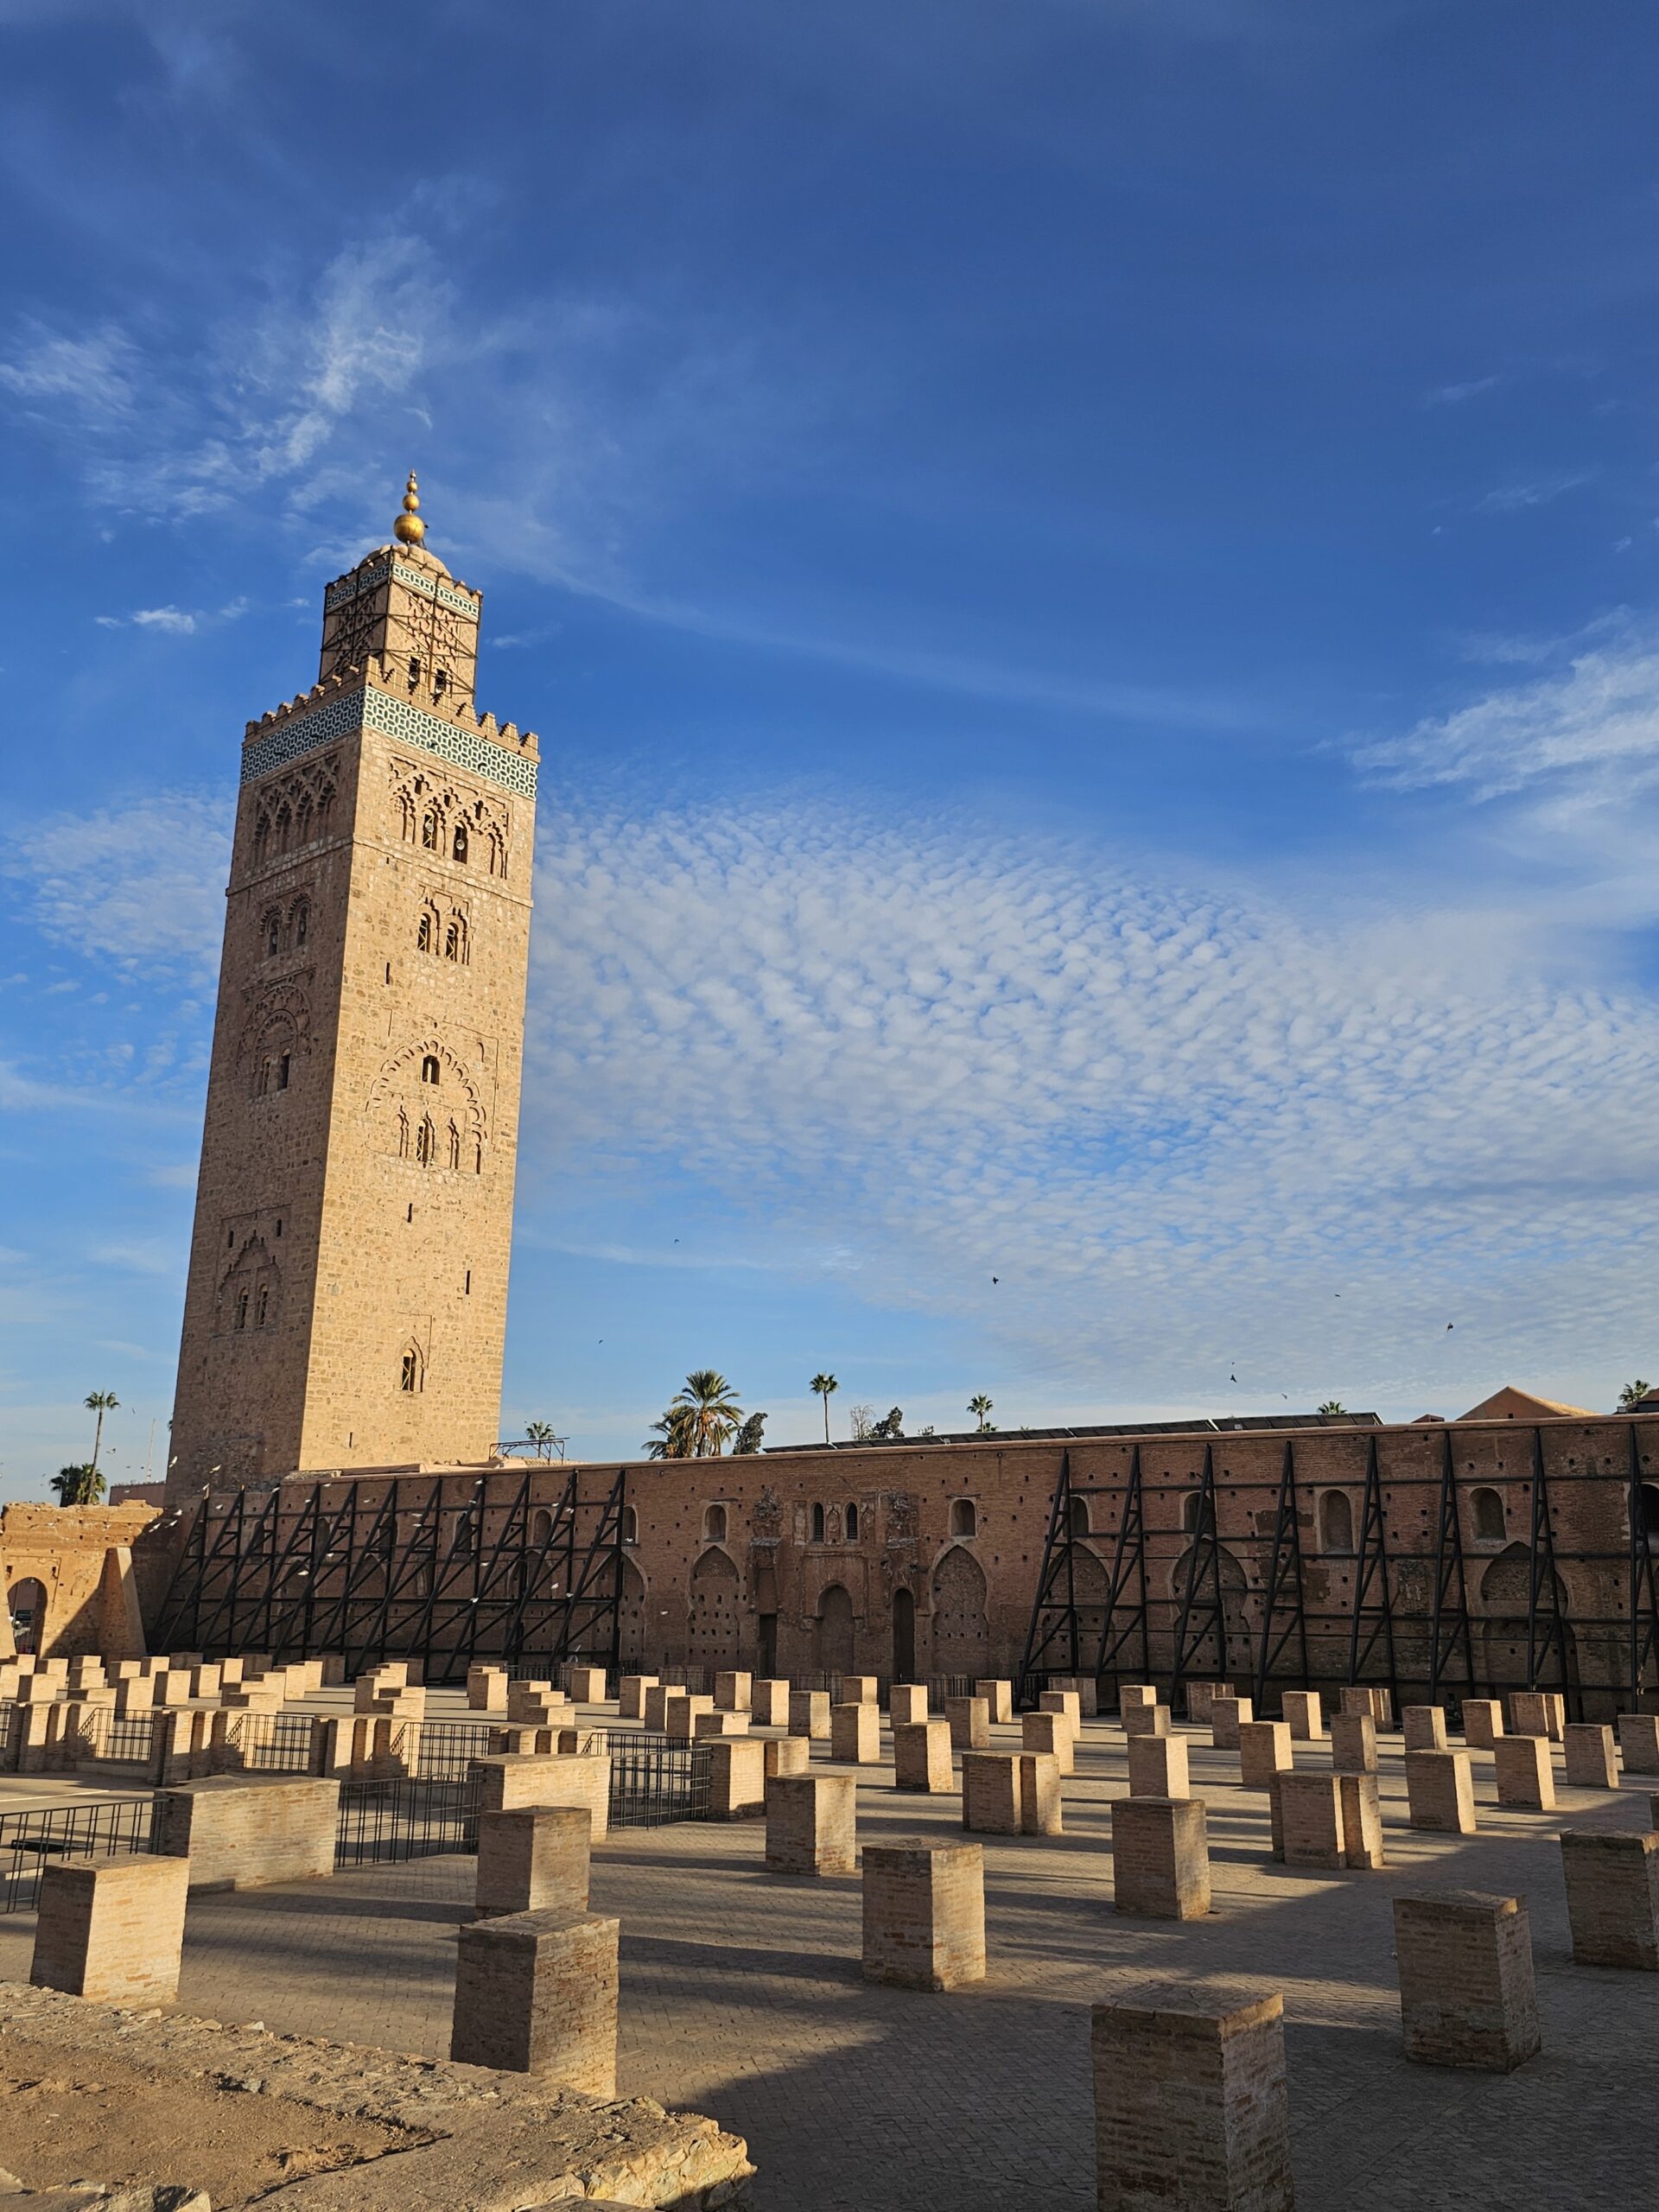 Sideview of The 12th century Koutoubia Mosque and its front yard with pillars, Marrakesh. Image by 360onhistory.com